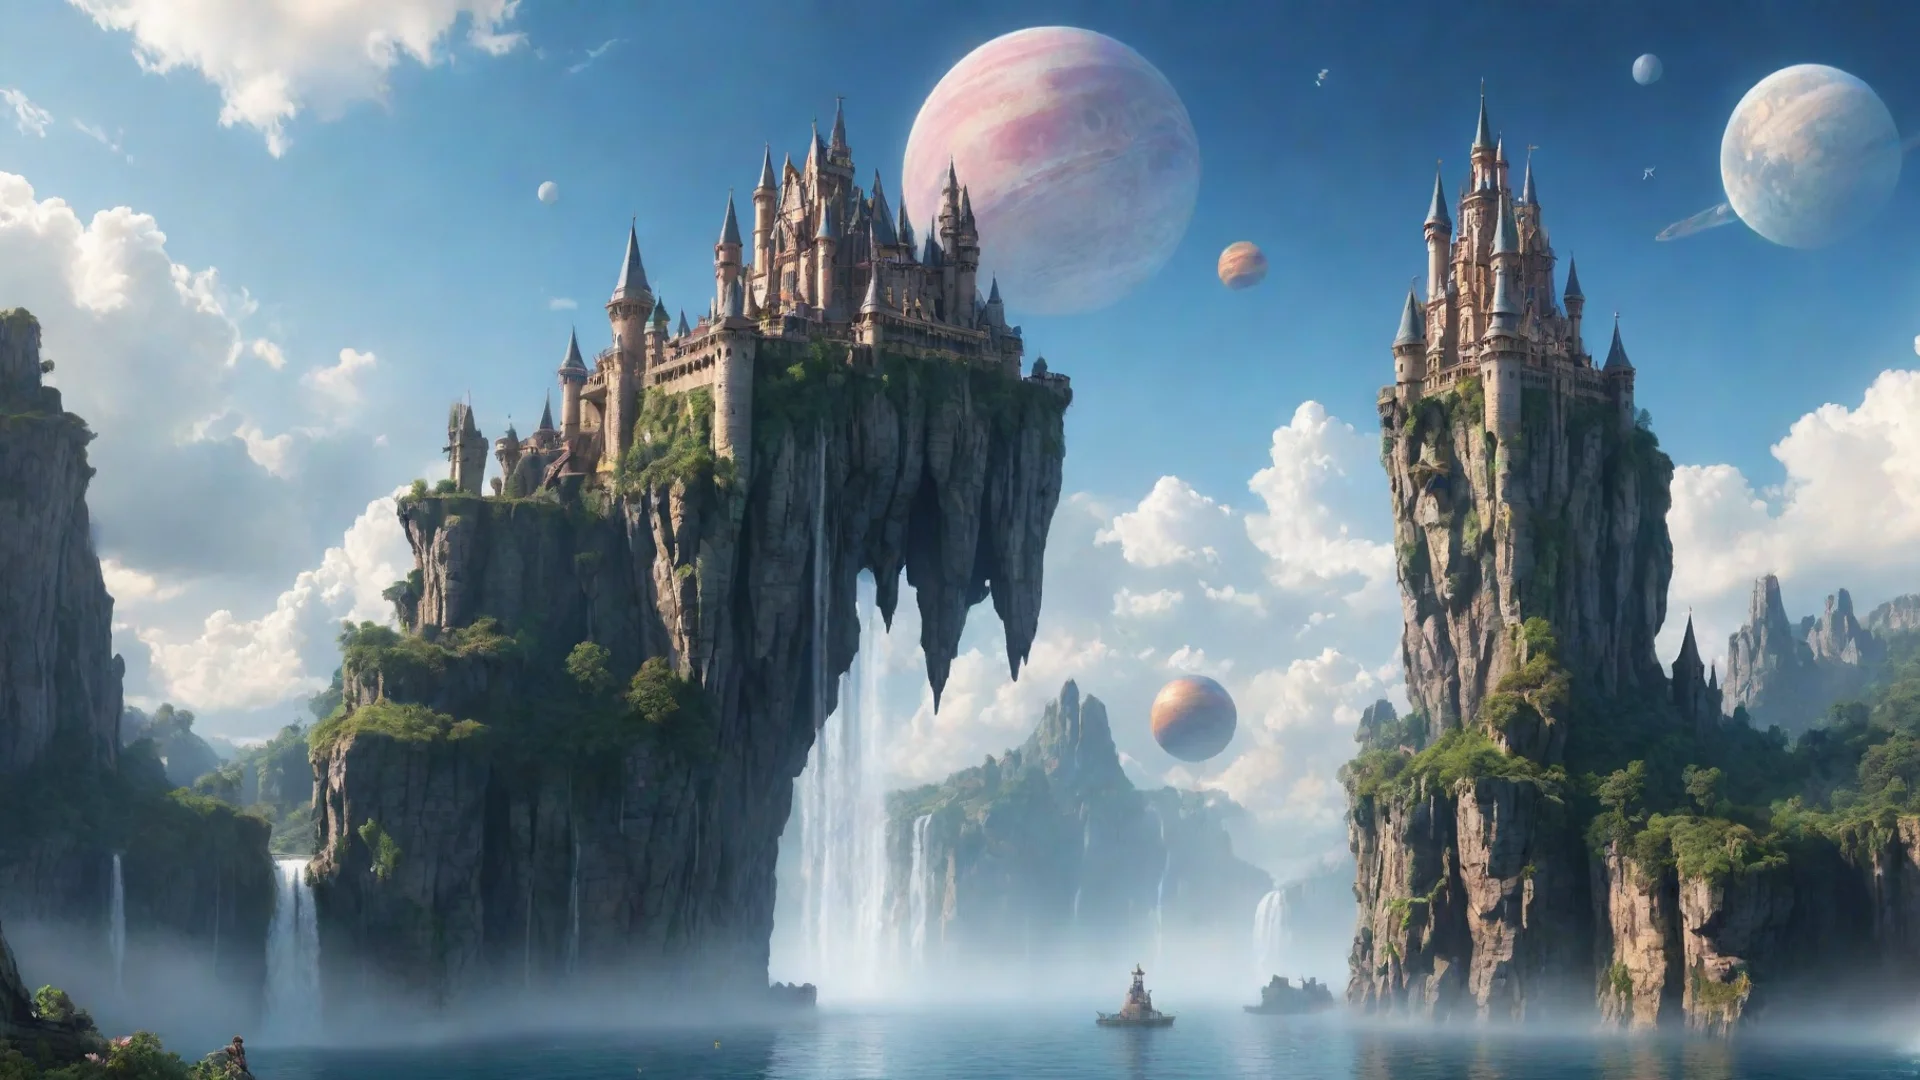 aiamazing peaceful castle in sky epic floating castle on floating cliffs with waterfalls down beautiful sky with saturn planets awesome portrait 2 wide